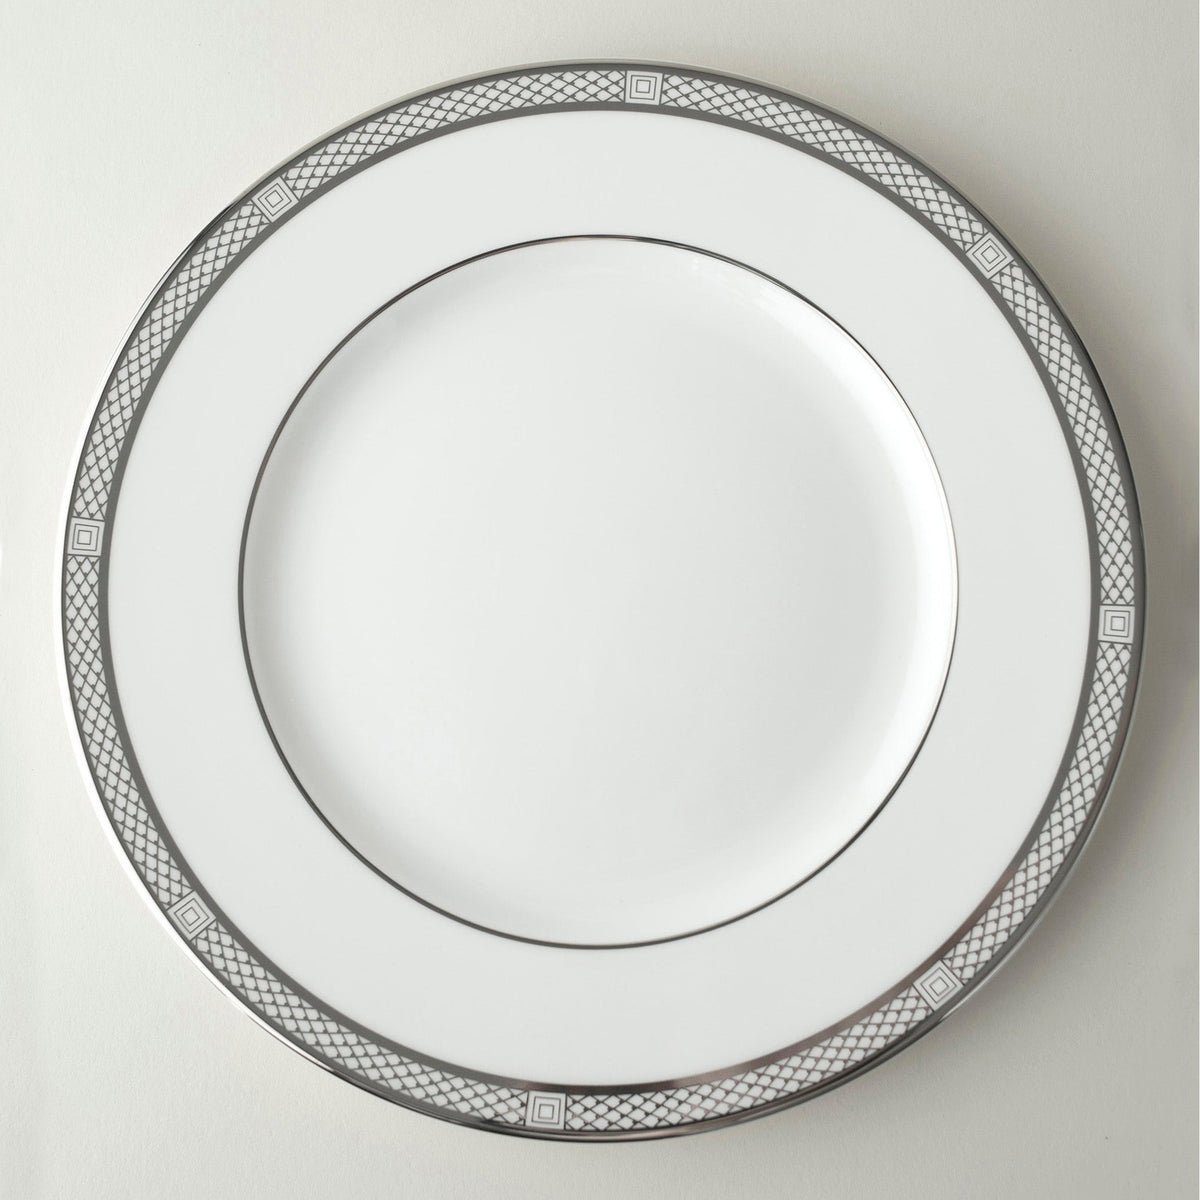 A Hawthorne Ice Platinum Simple Dinner Plate by Caskata Artisanal Home on a white marble surface.